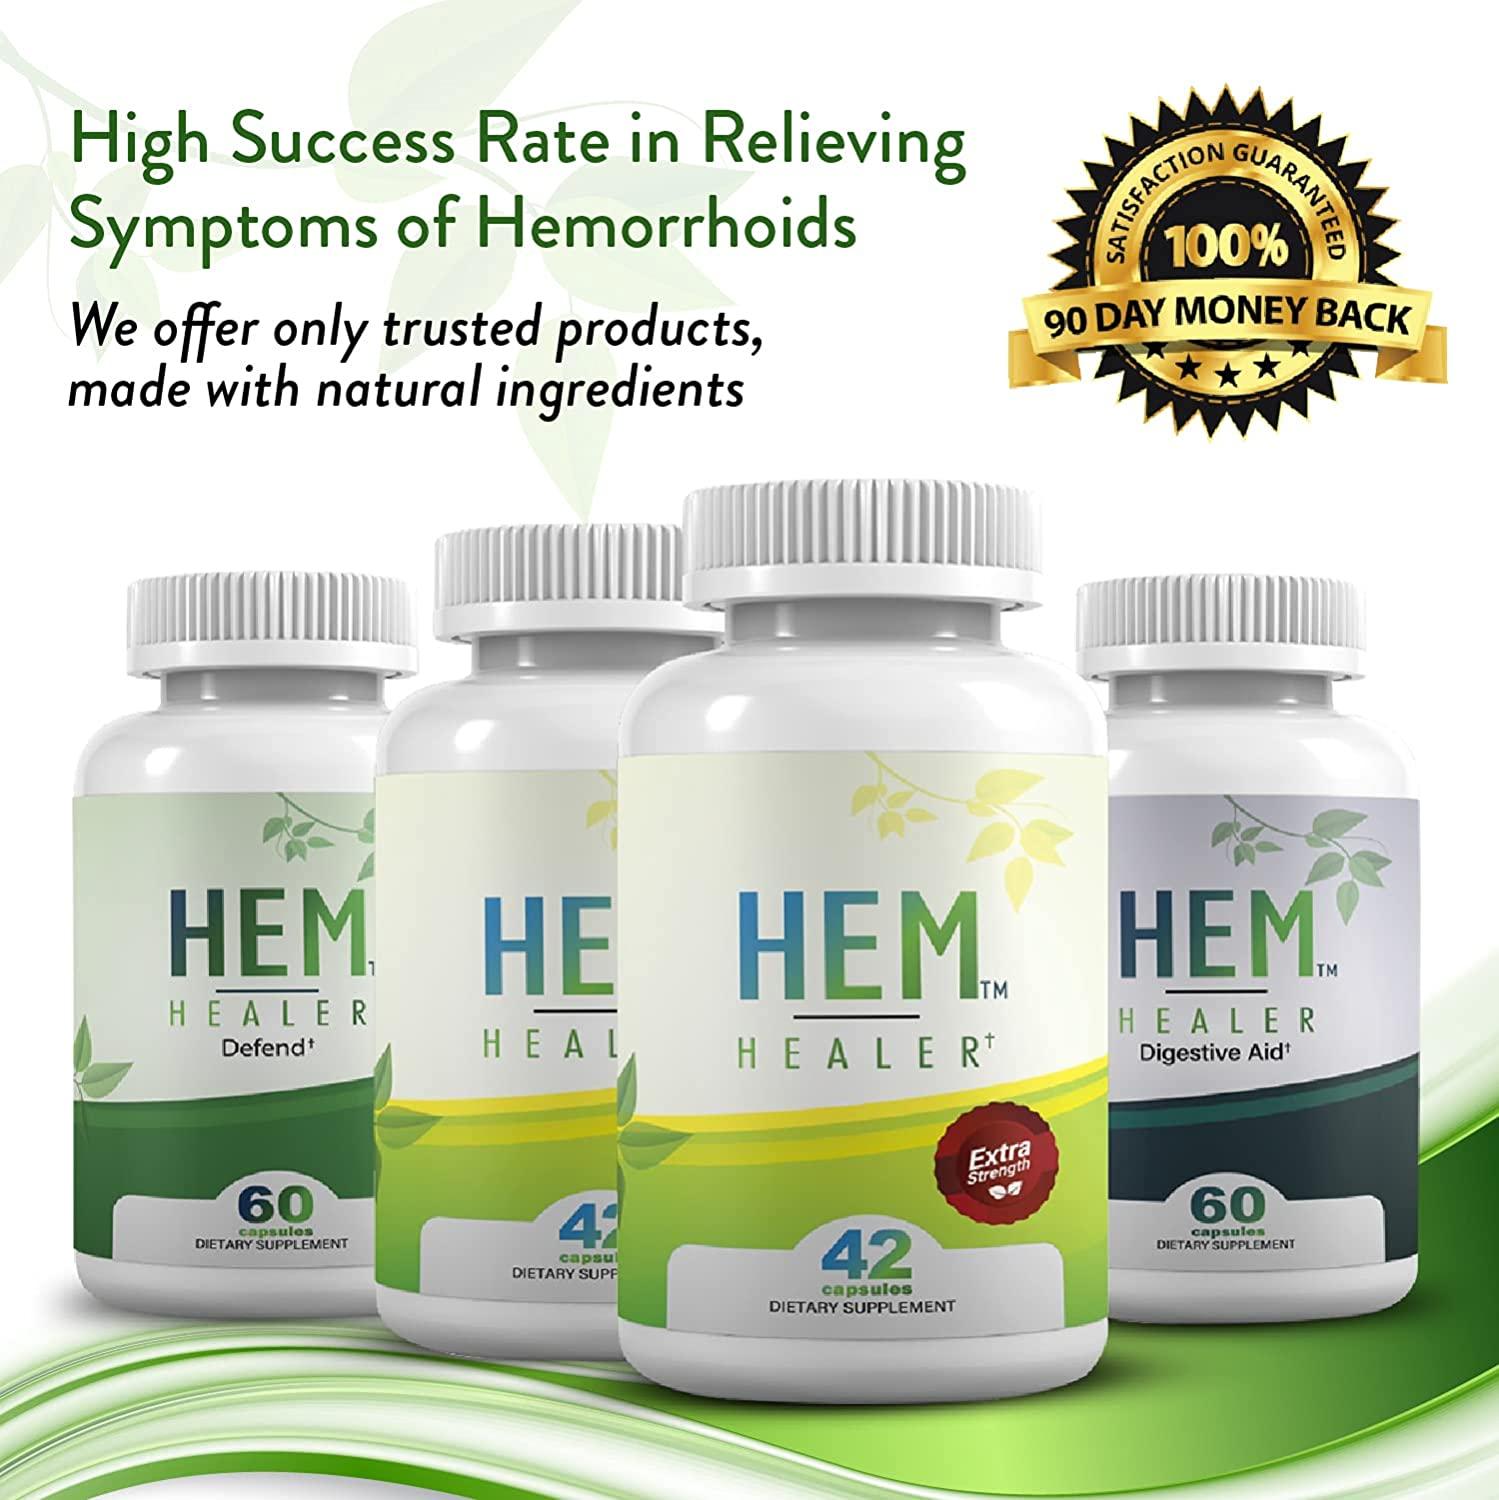 Hem Healer Hemorrhoid Treatment For Hemorrhoid Relief Reduce Swelling And Inflammation Soothe 5244